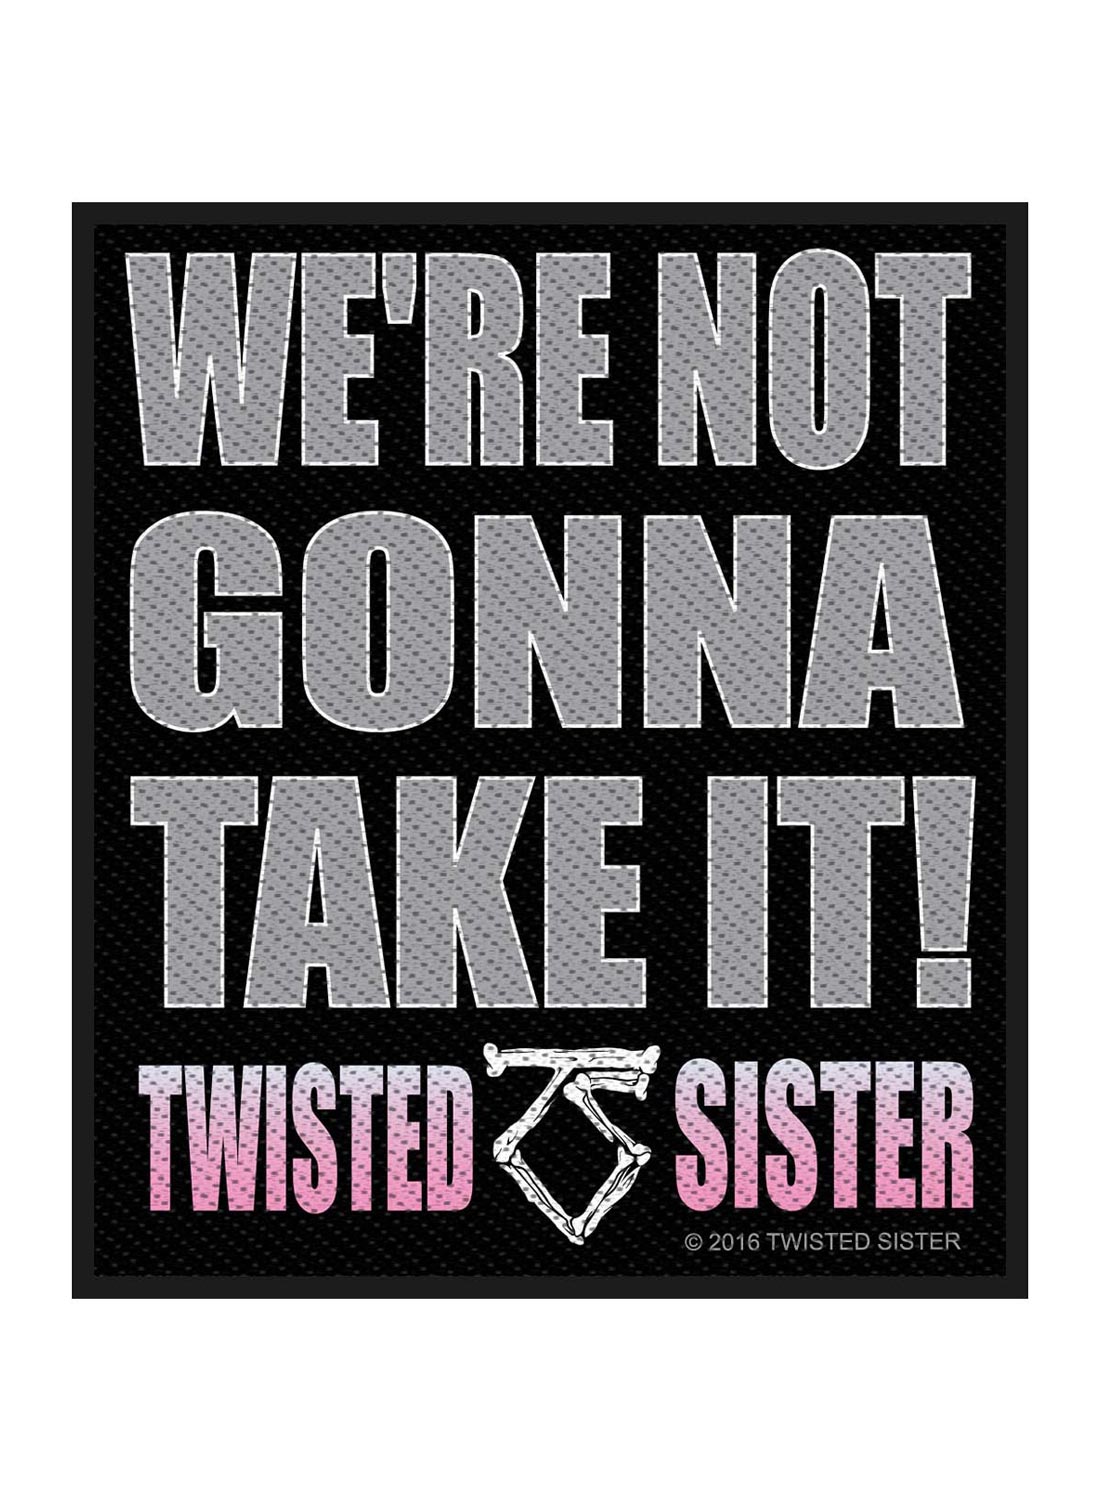 Twisted Sister We're Not Gonna Take It Patch